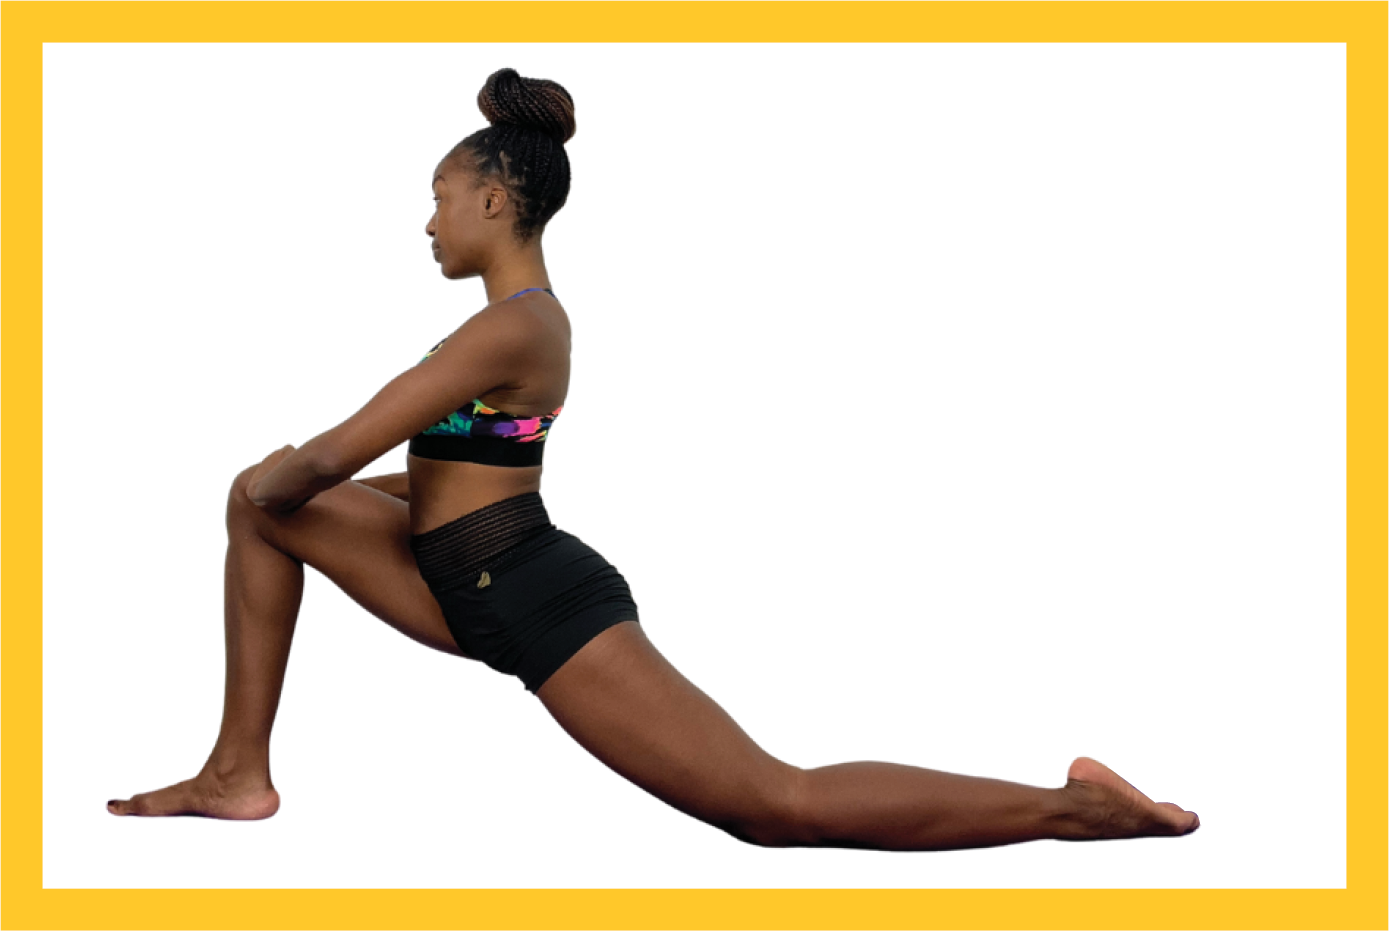 How To Do The Splits Safely - One-Week Stretching Training Guide